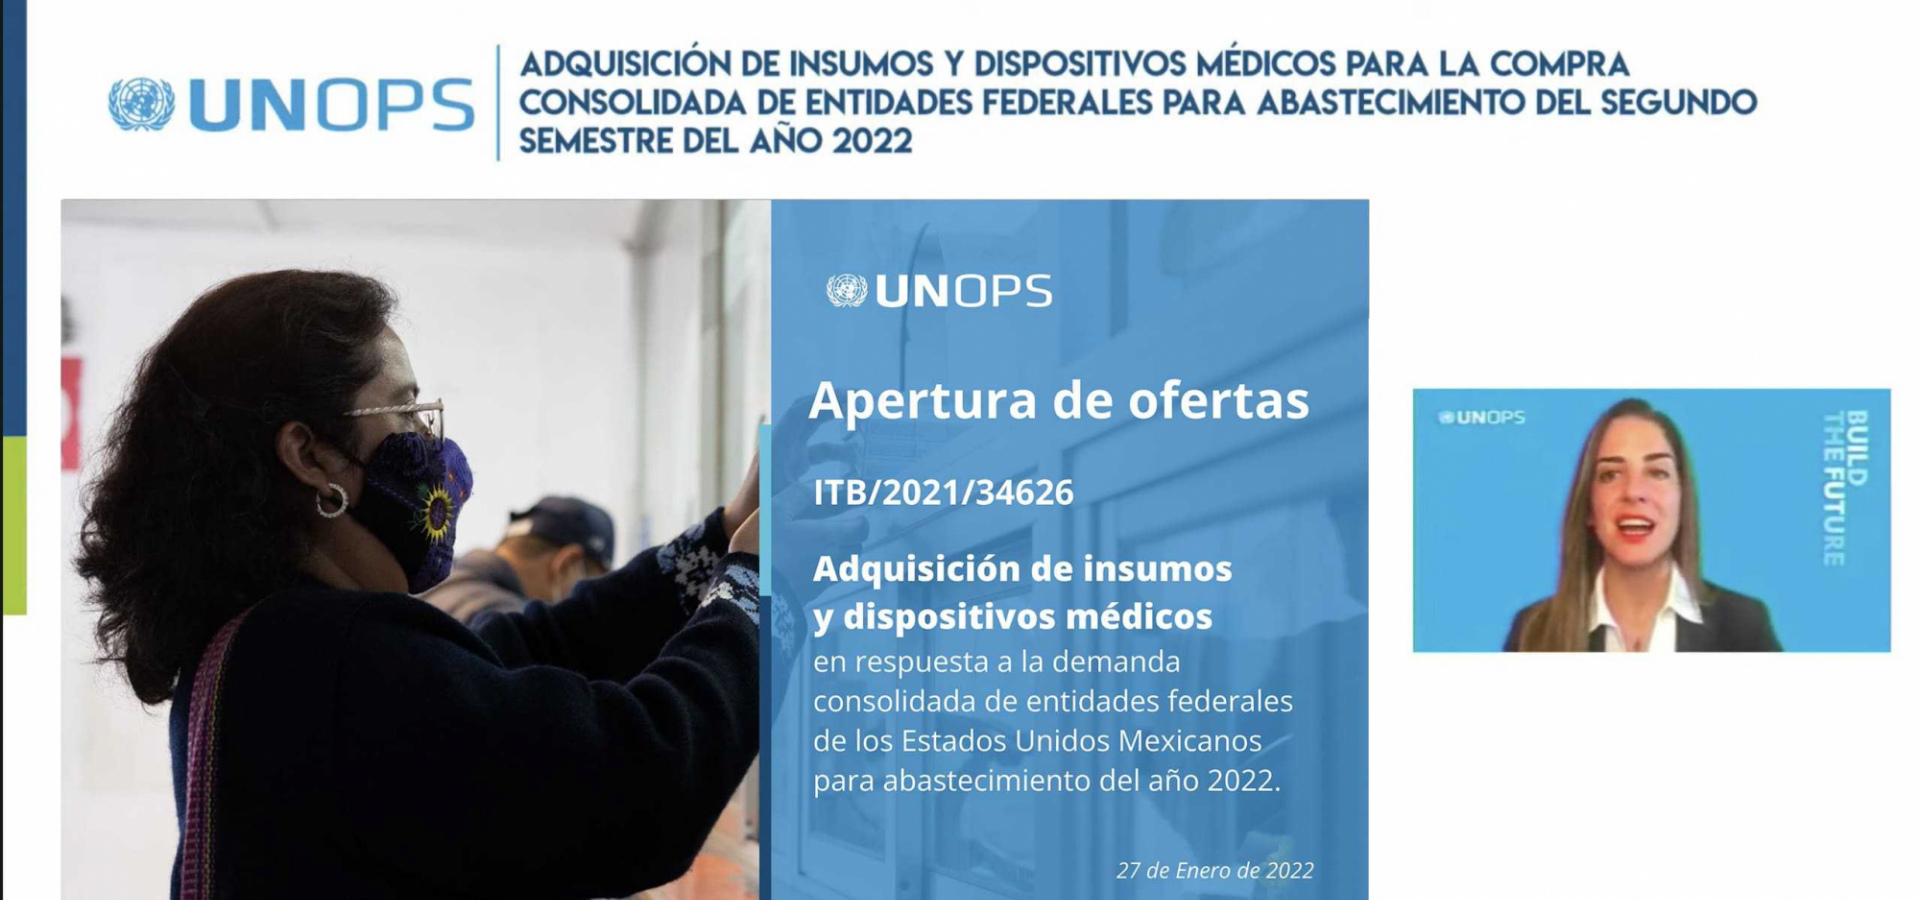 Report on the opening of international tender offers for the procurement of medical supplies and devices 2022